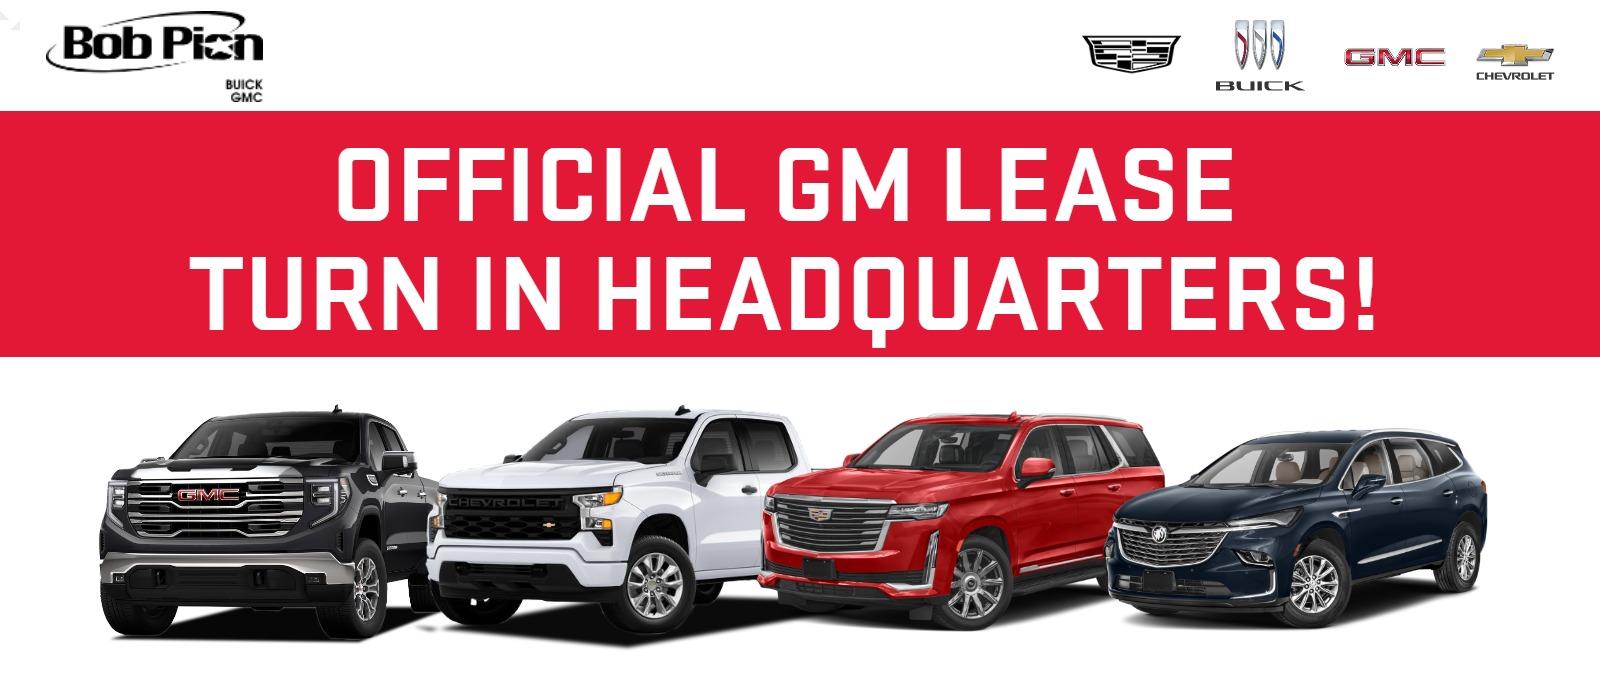 OFFICIAL GM LEASE TURN IN HEADQUARTERS!